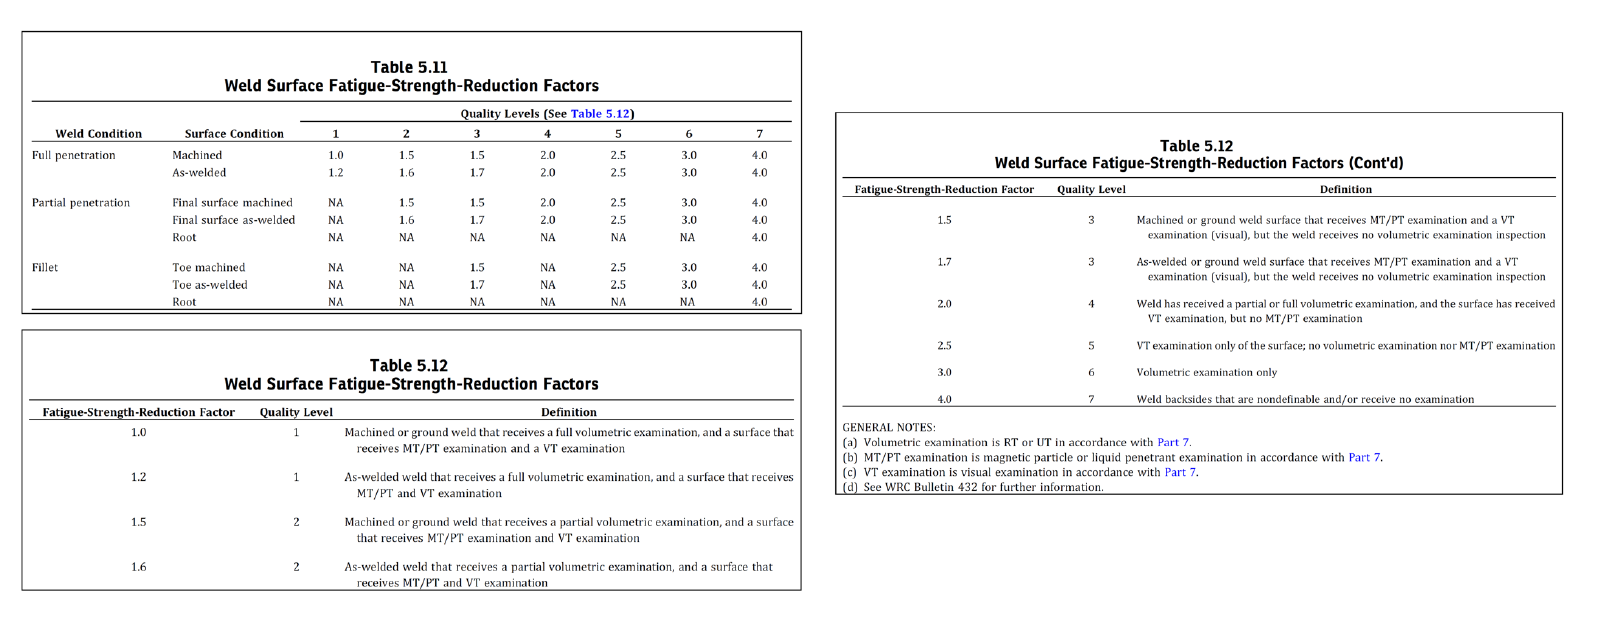 ASME Part 5.5 - Fatigue of Welded Structures Weld Surface Fatigue Reduction Factors - Predictive Engineering ASME Div 1 and Div 2 Alternative Rules Consulting Engineers